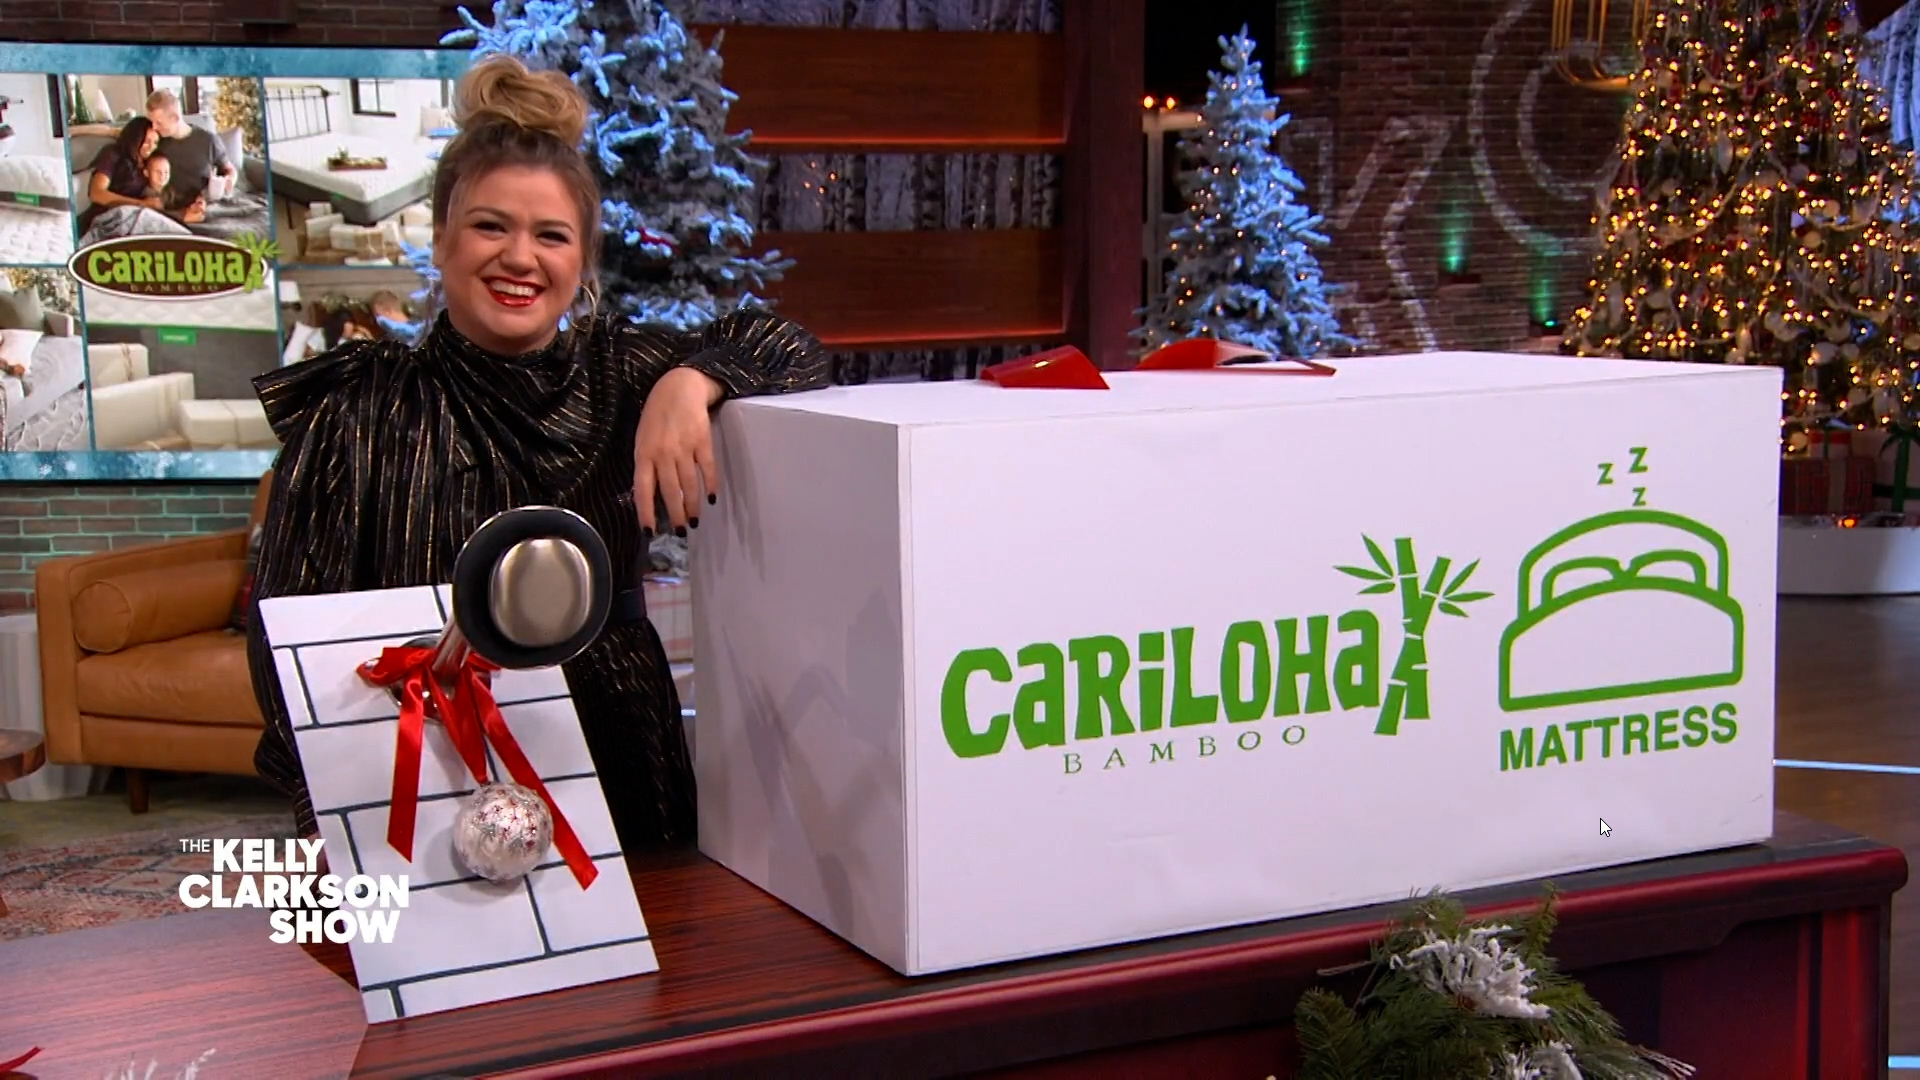 The Kelly Clarkson Show Features Cariloha Bamboo